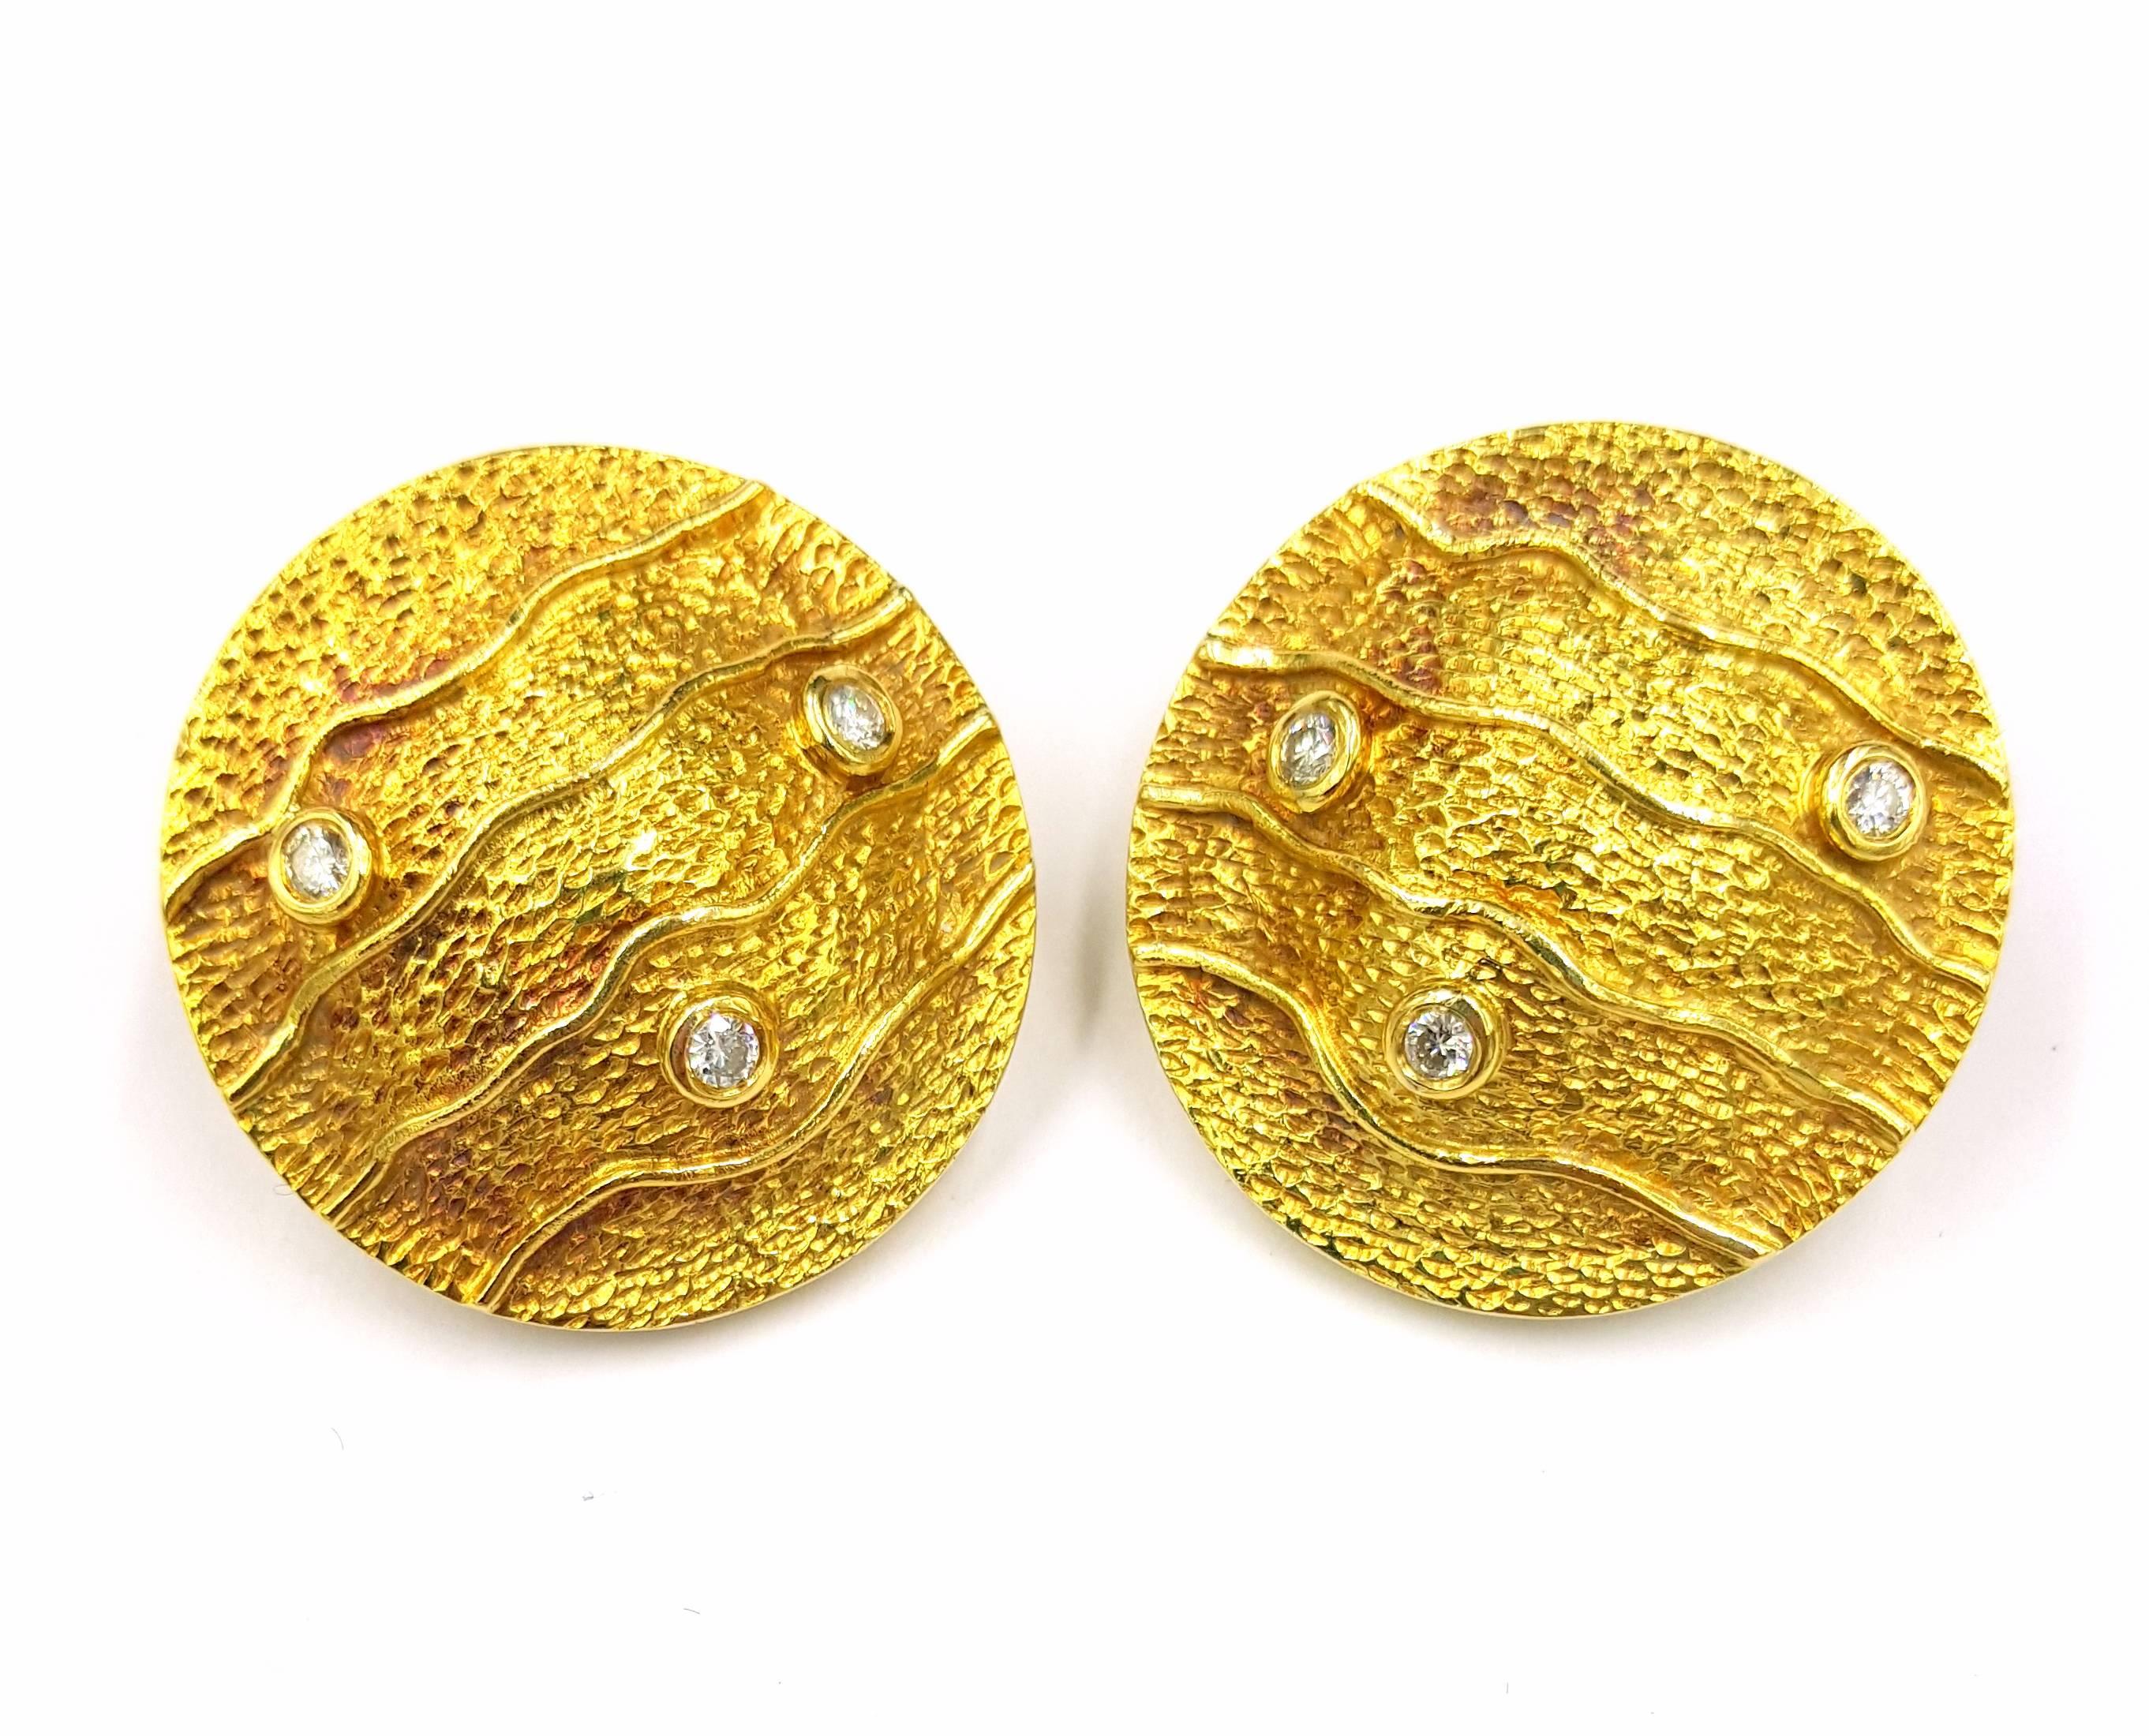 Gorgeous waves textured 18kt gold and .30 carats of VS clarity and F colored diamond clip on earrings offered by famous Greek Designer Mapamenos Natepas. These earrings are 1.25 inches in diameter and have a weight of 21.5 grams.

These Famous